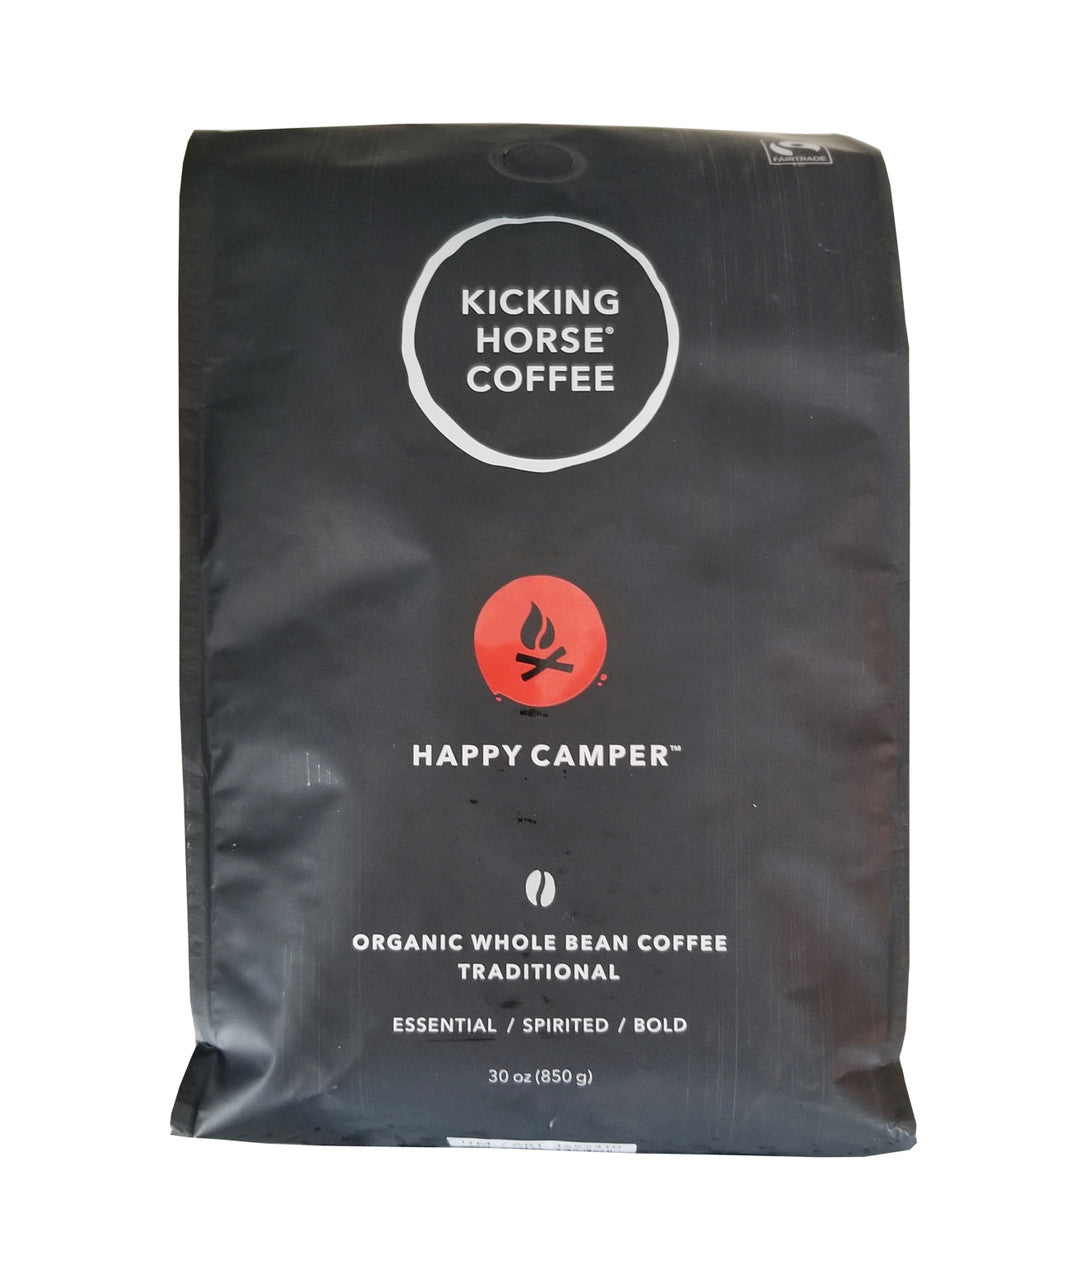 Kicking Horse Organic Happy Camper Whole Bean Coffee, 30 oz./830g {Imported from Canada}